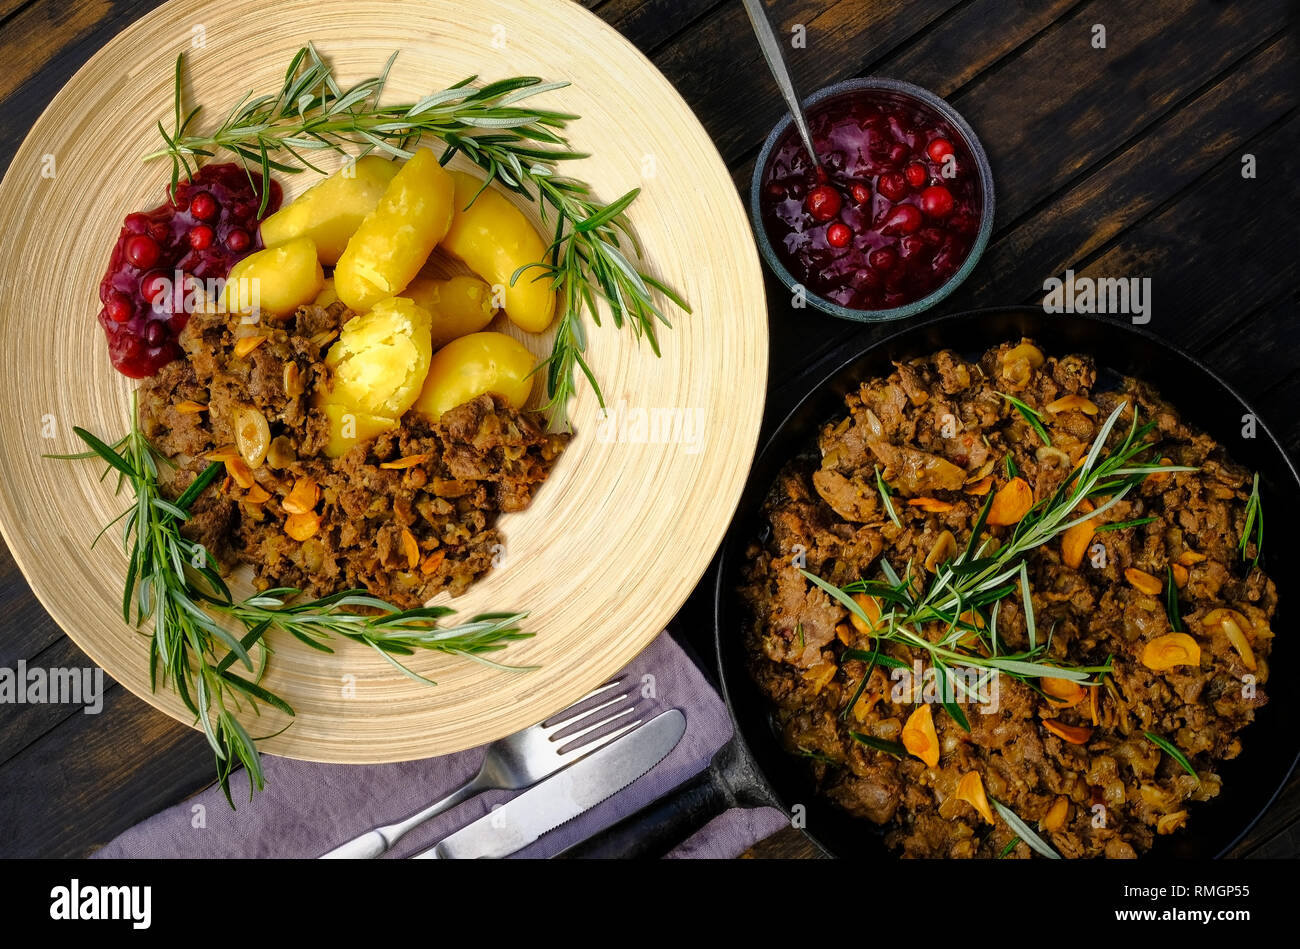 Sauteed reindeer, lingonberry jam and almond potatoes which is a Finnish speciality called also yellow Finn and Puikula. Stock Photo